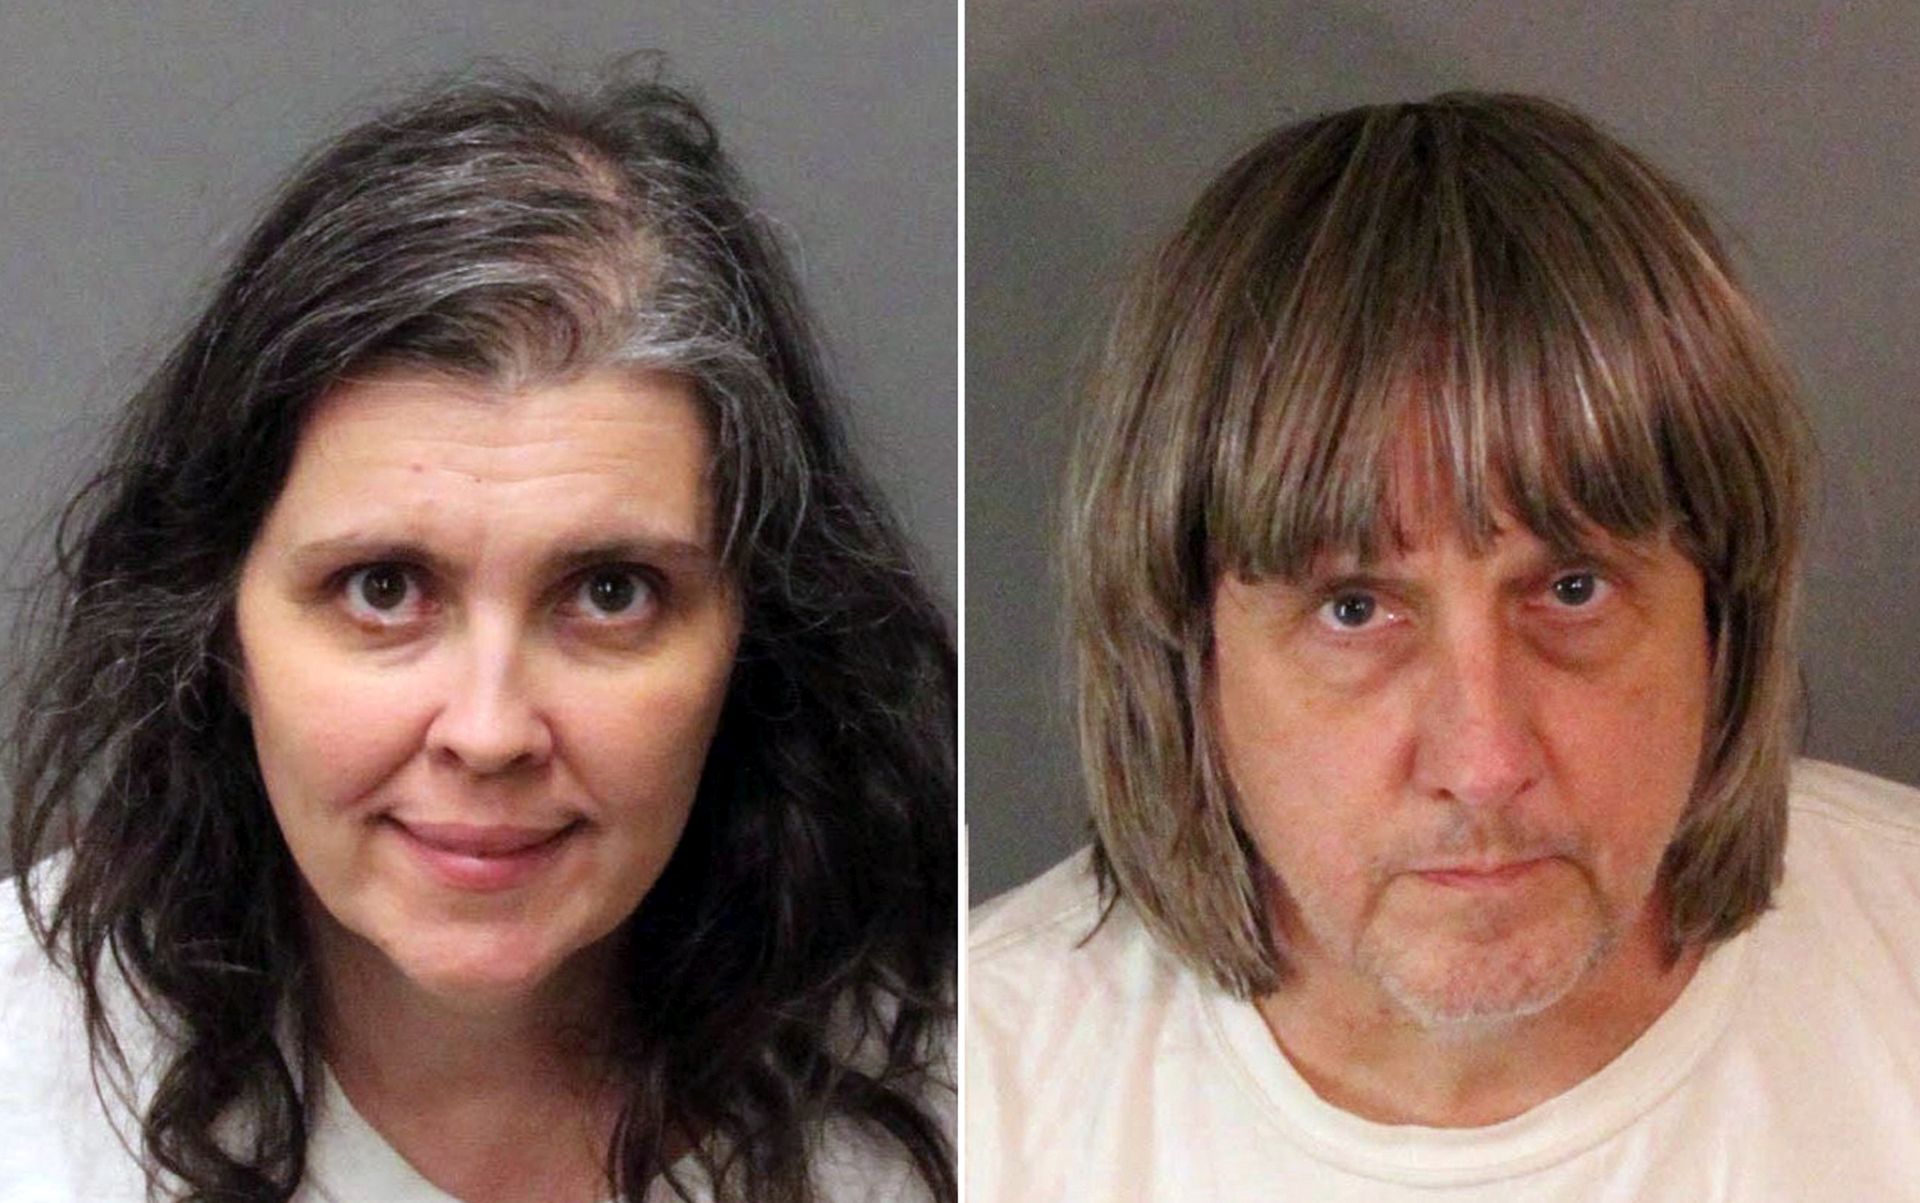 epa07516654 (FILE) - (COMPOSITE) - An undated composite file handout photo made available by the Riverside County Sheriff's Department shows David Allen Turpin (R) and Louise Anna Turpin (L), who were arrested in Perris, California, USA, on 14 January 2018 and charged with torture and child endangerment for allegedly holding their 13 children captive in their home (reissued 19 April 2019). The two parents were convicted on counts of Child abuse, torture, abuse of dependent adults and false imprisonment, and have been sentenced to 25 years to life in prison.  EPA/RIVERSIDE COUNTY SHERIFF'S DEPAR  HANDOUT EDITORIAL USE ONLY HANDOUT EDITORIAL USE ONLY